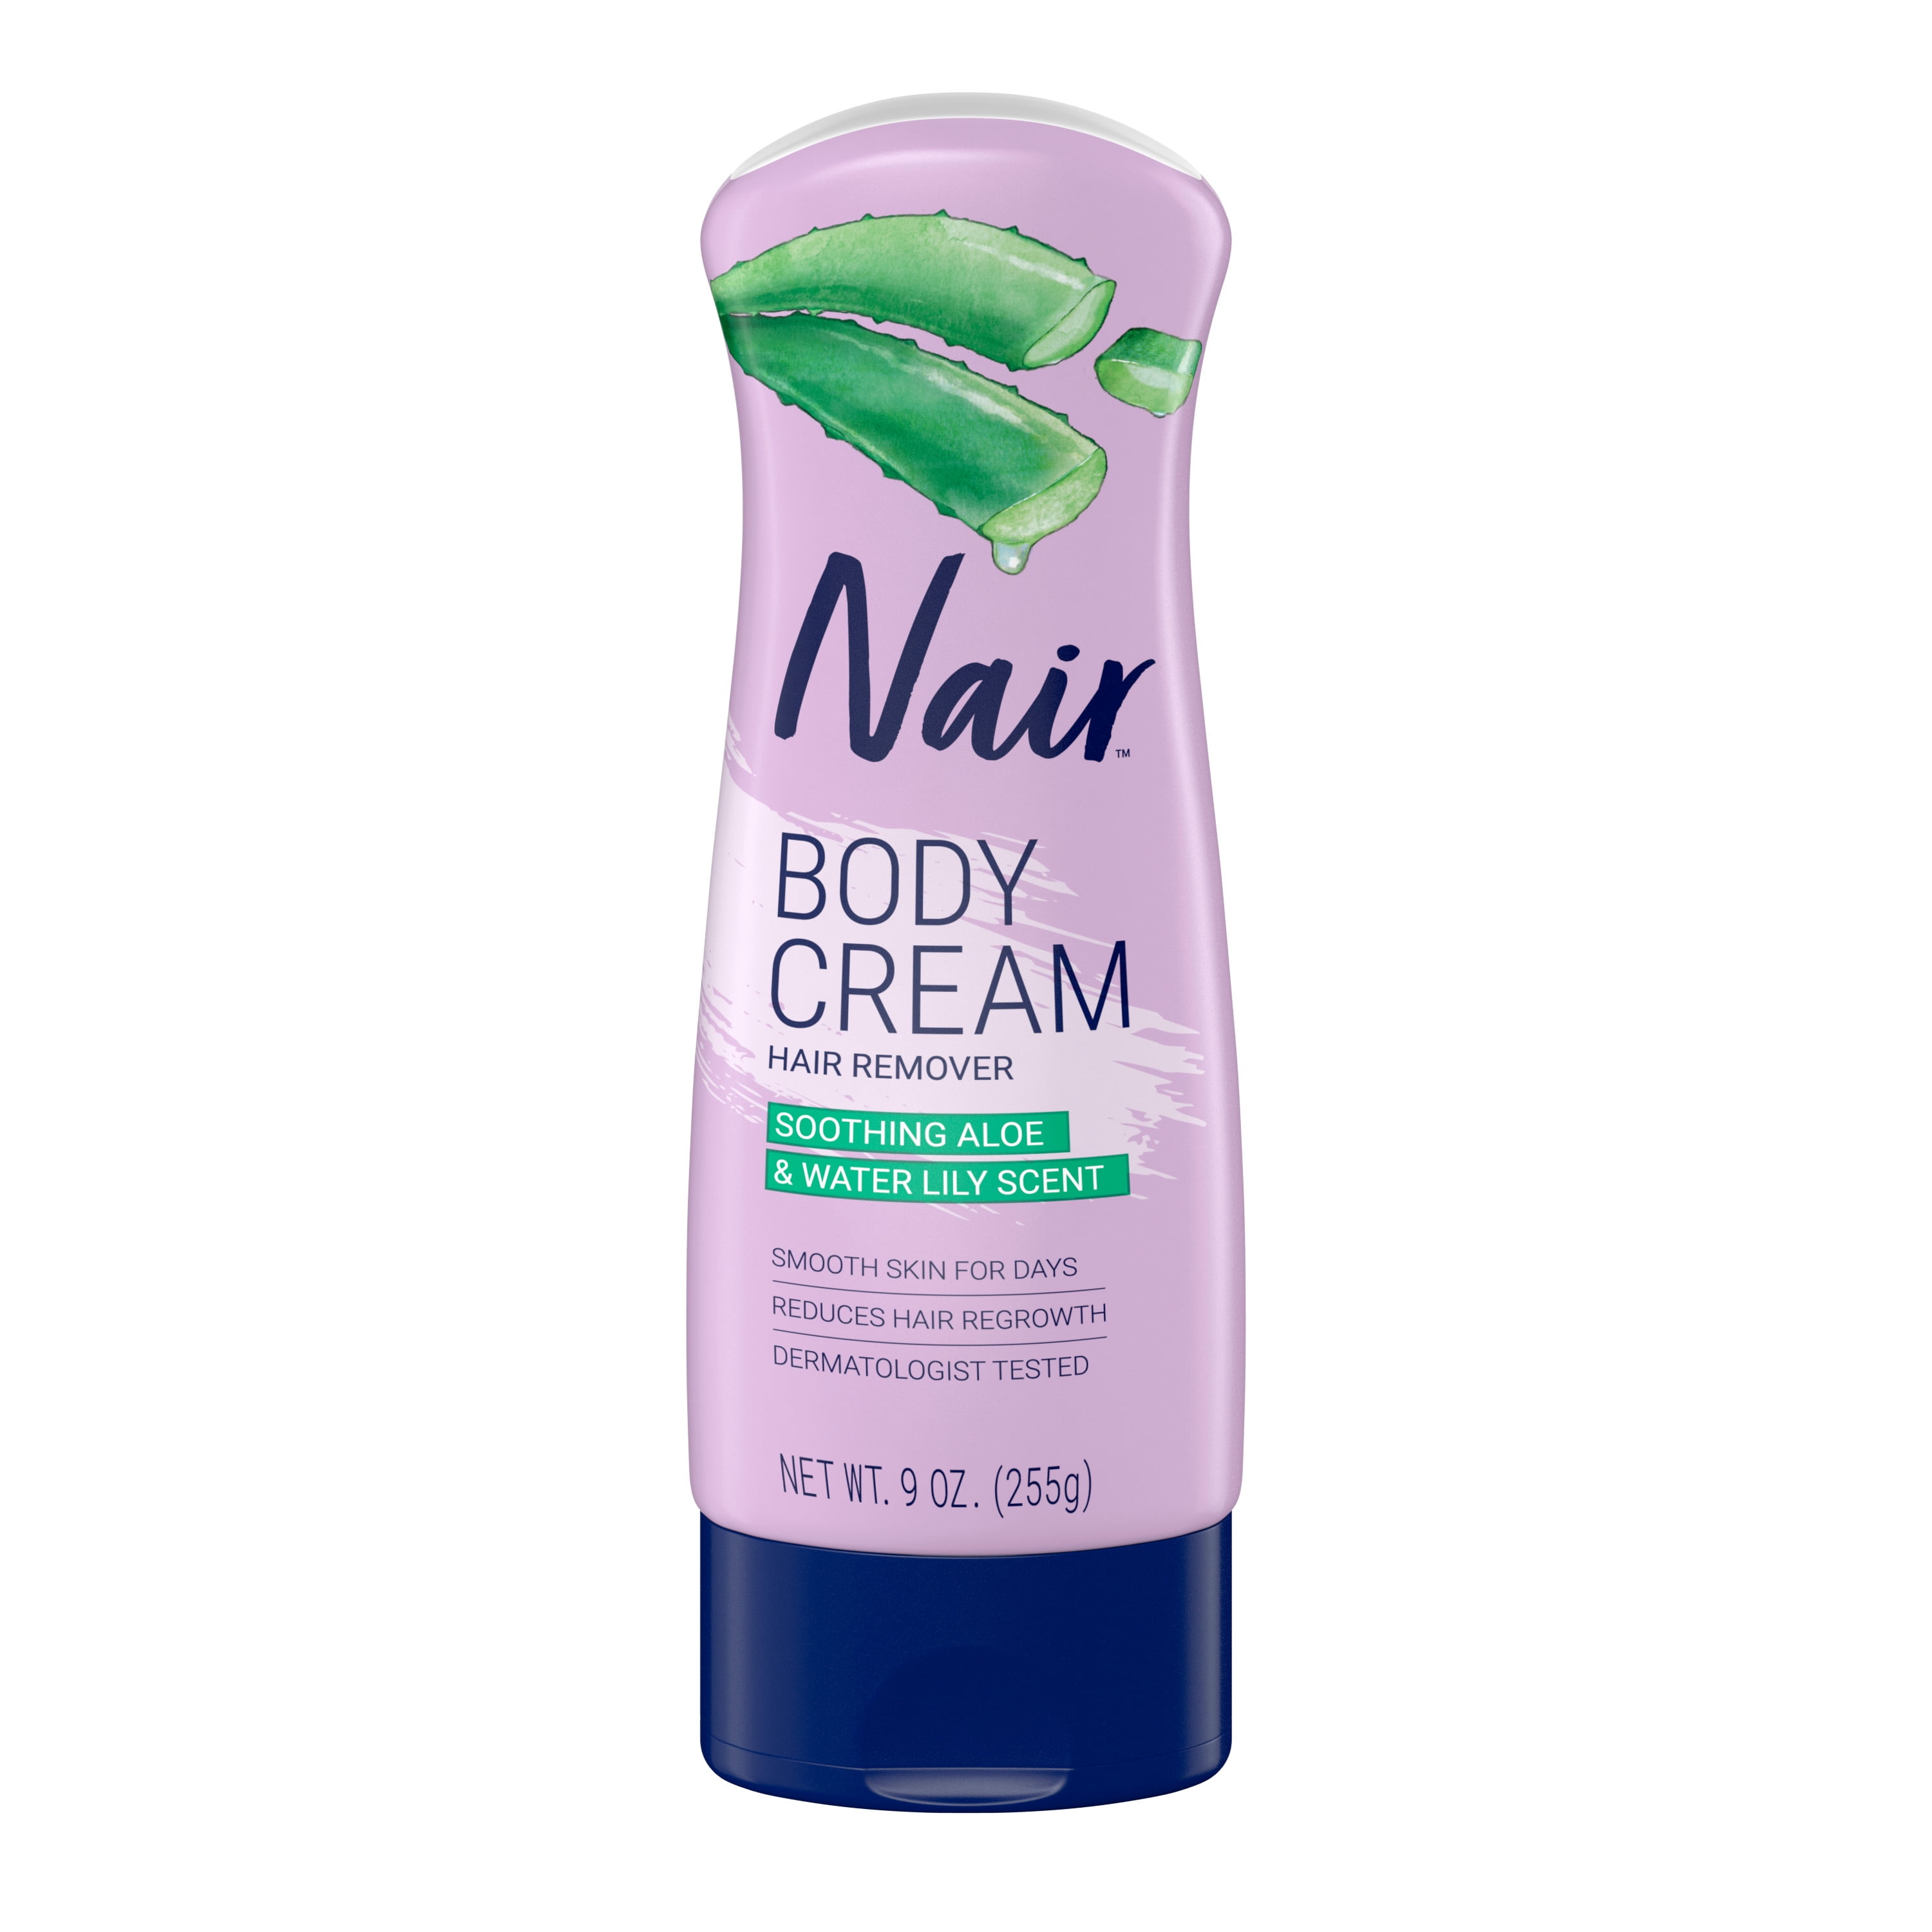 Nair Hair Removal Body Cream With Cocoa Butter and Vitamin E, Leg and Body Hair  Remover, 9 Oz Bottle 